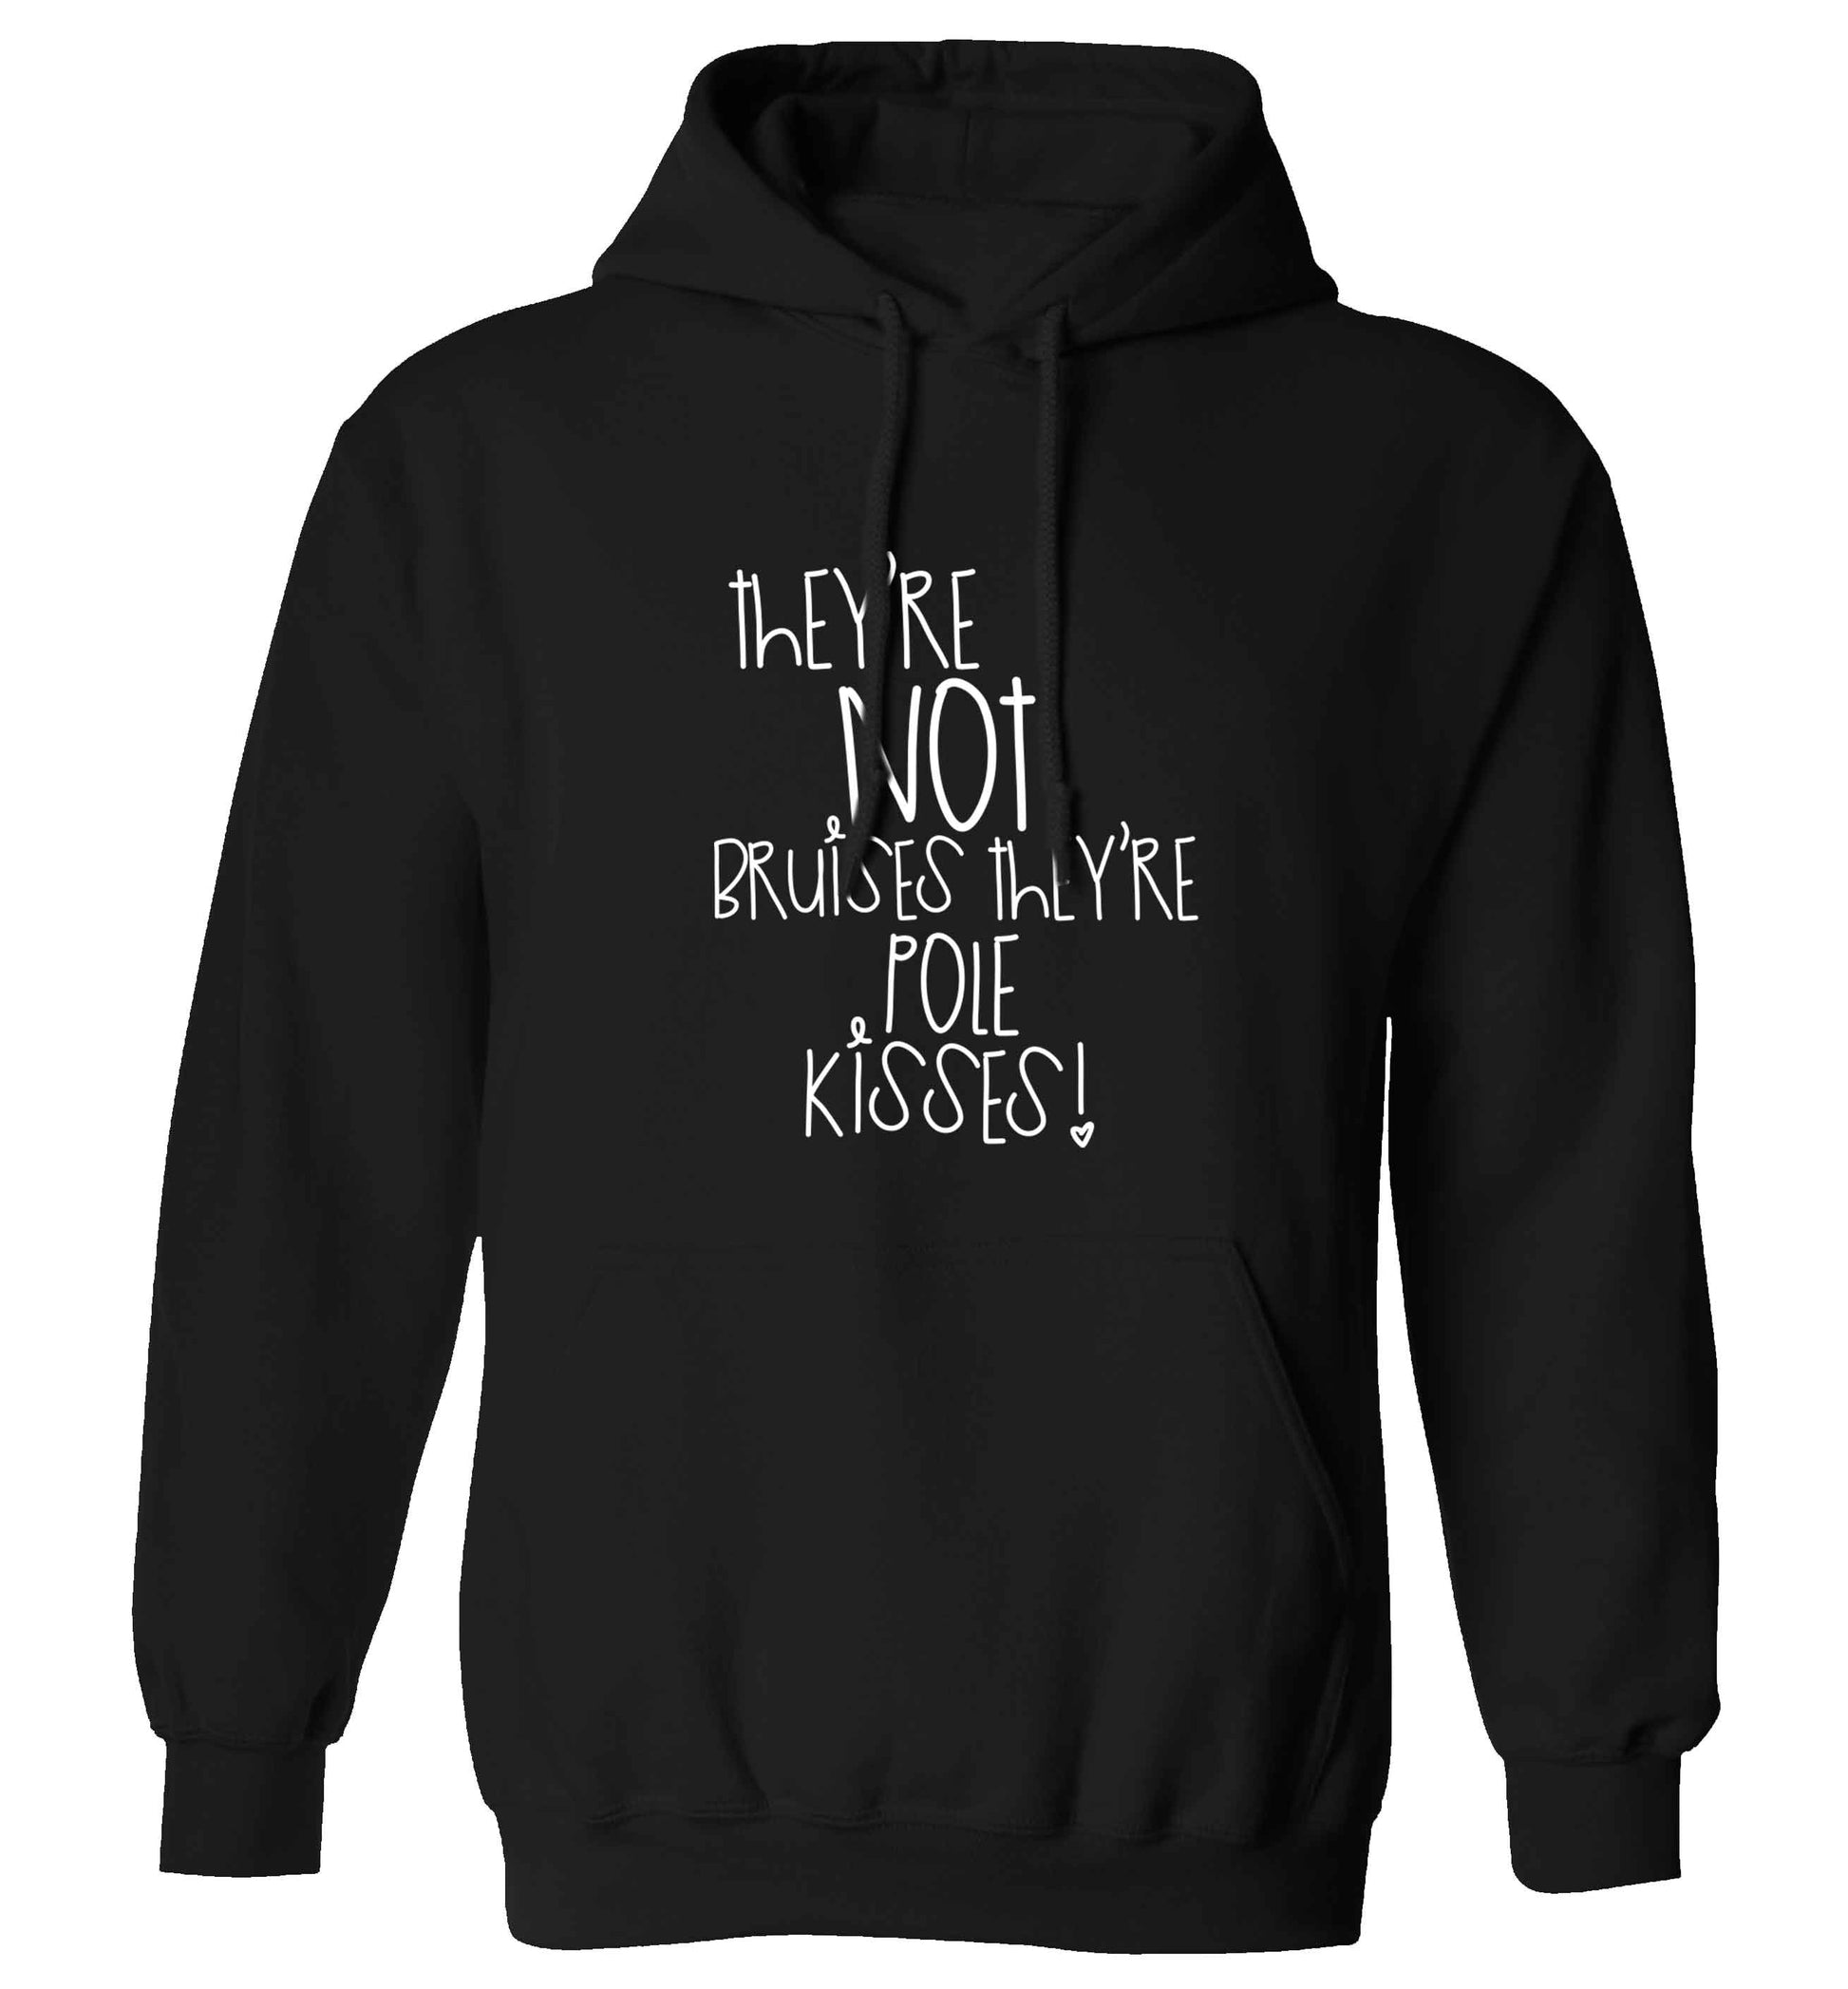 They're not bruises they're pole kisses adults unisex black hoodie 2XL